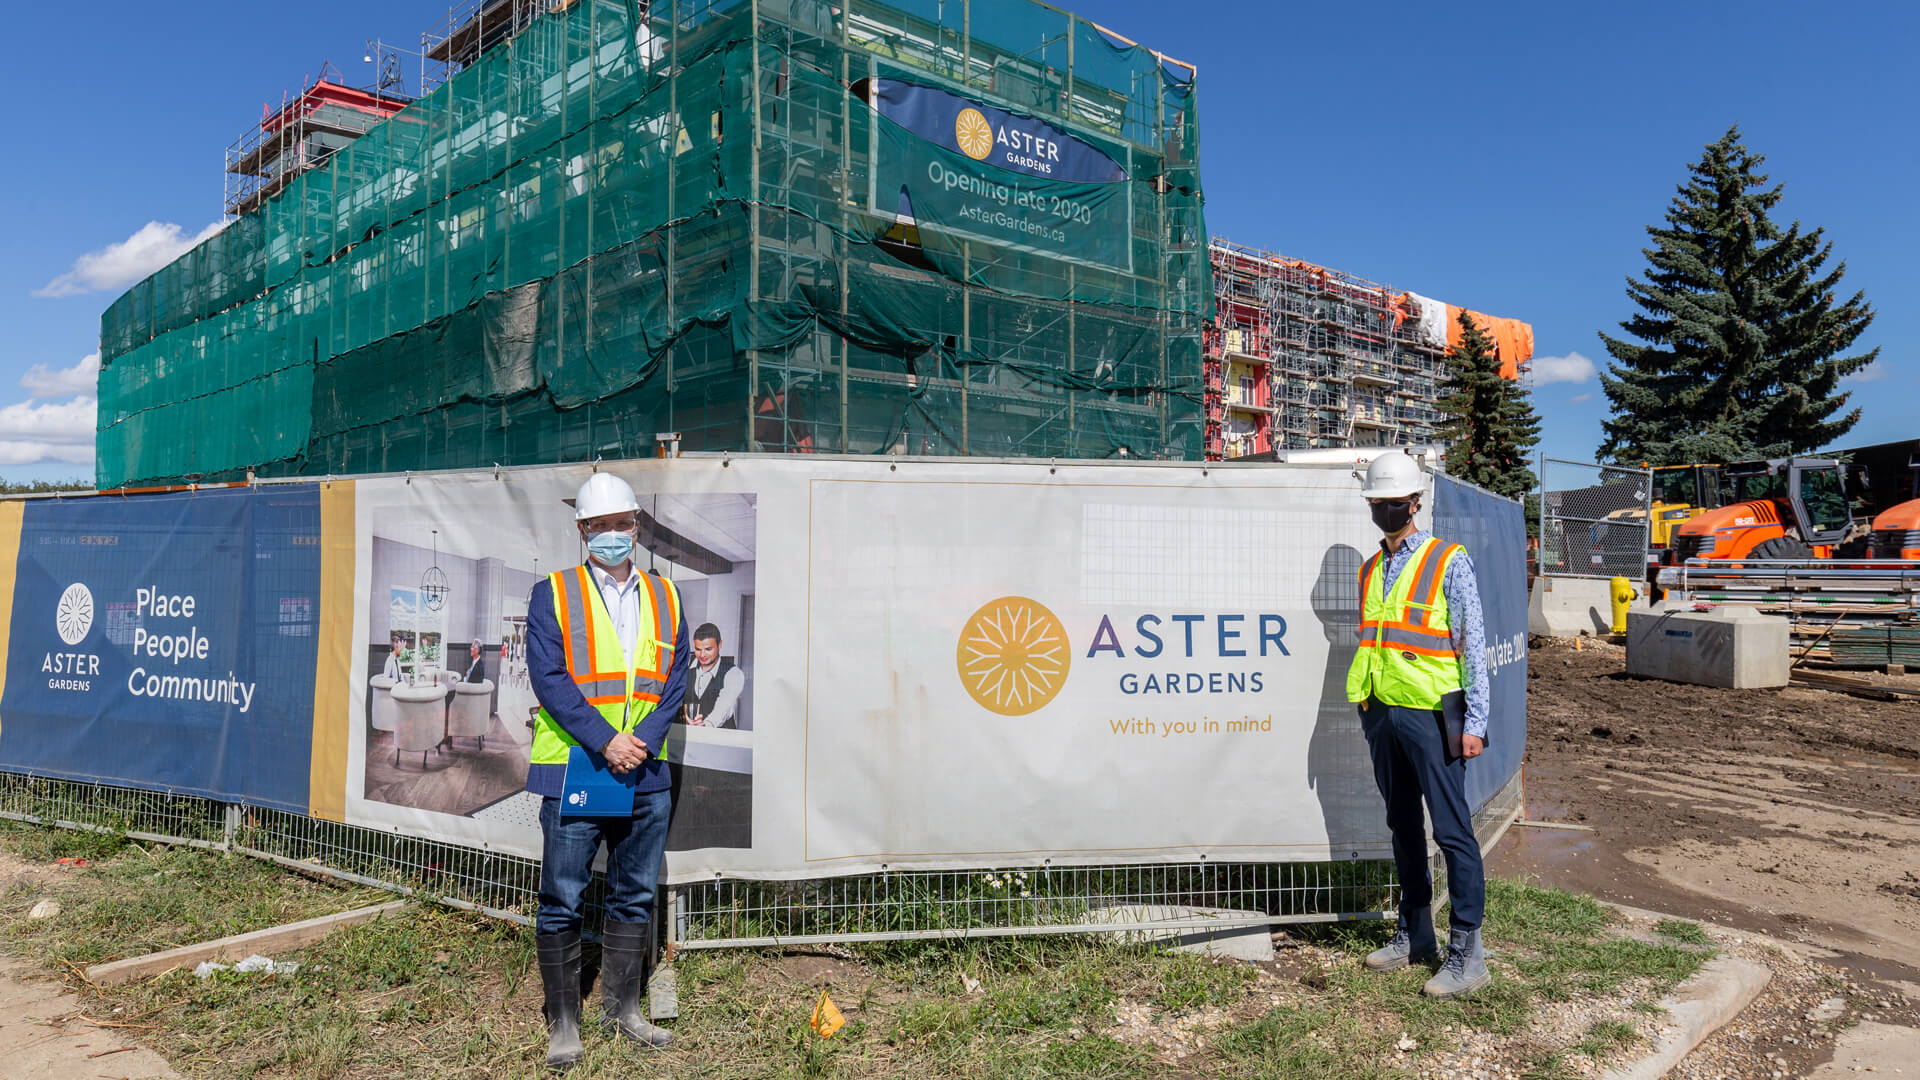 A photo of Aster Gardens during Construction